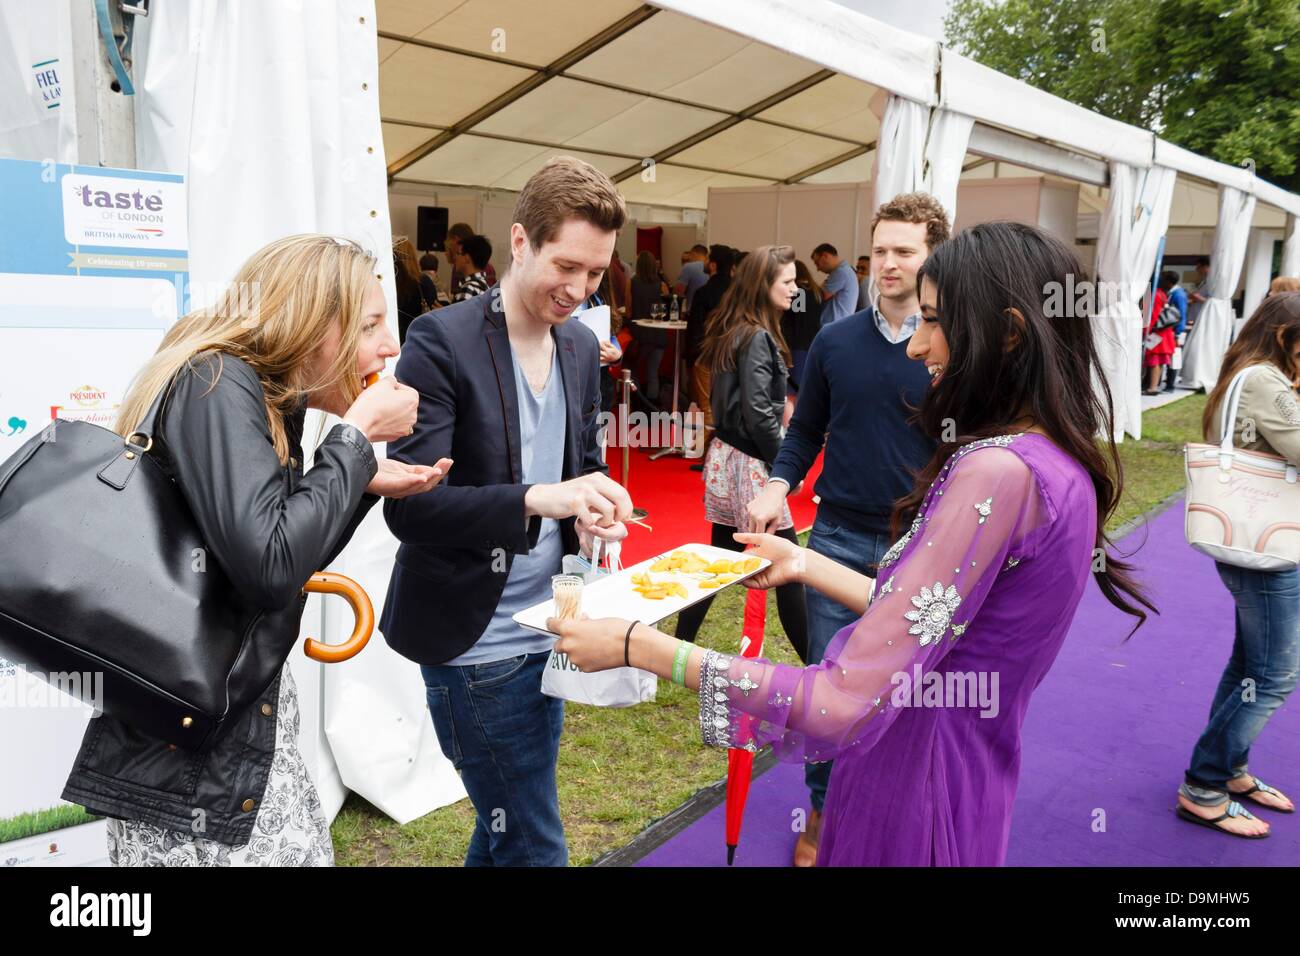 London, UK. 22nd June 2013. Taste of London 2013, visitors sample mango fruit. The event takes place every year in Regents Park, where 40 of the city's top restaurants serve their finest dishes for visitors to sample. London, UK. 22nd June 2013. Photo: Paul Maguire/Alamy Live News Stock Photo